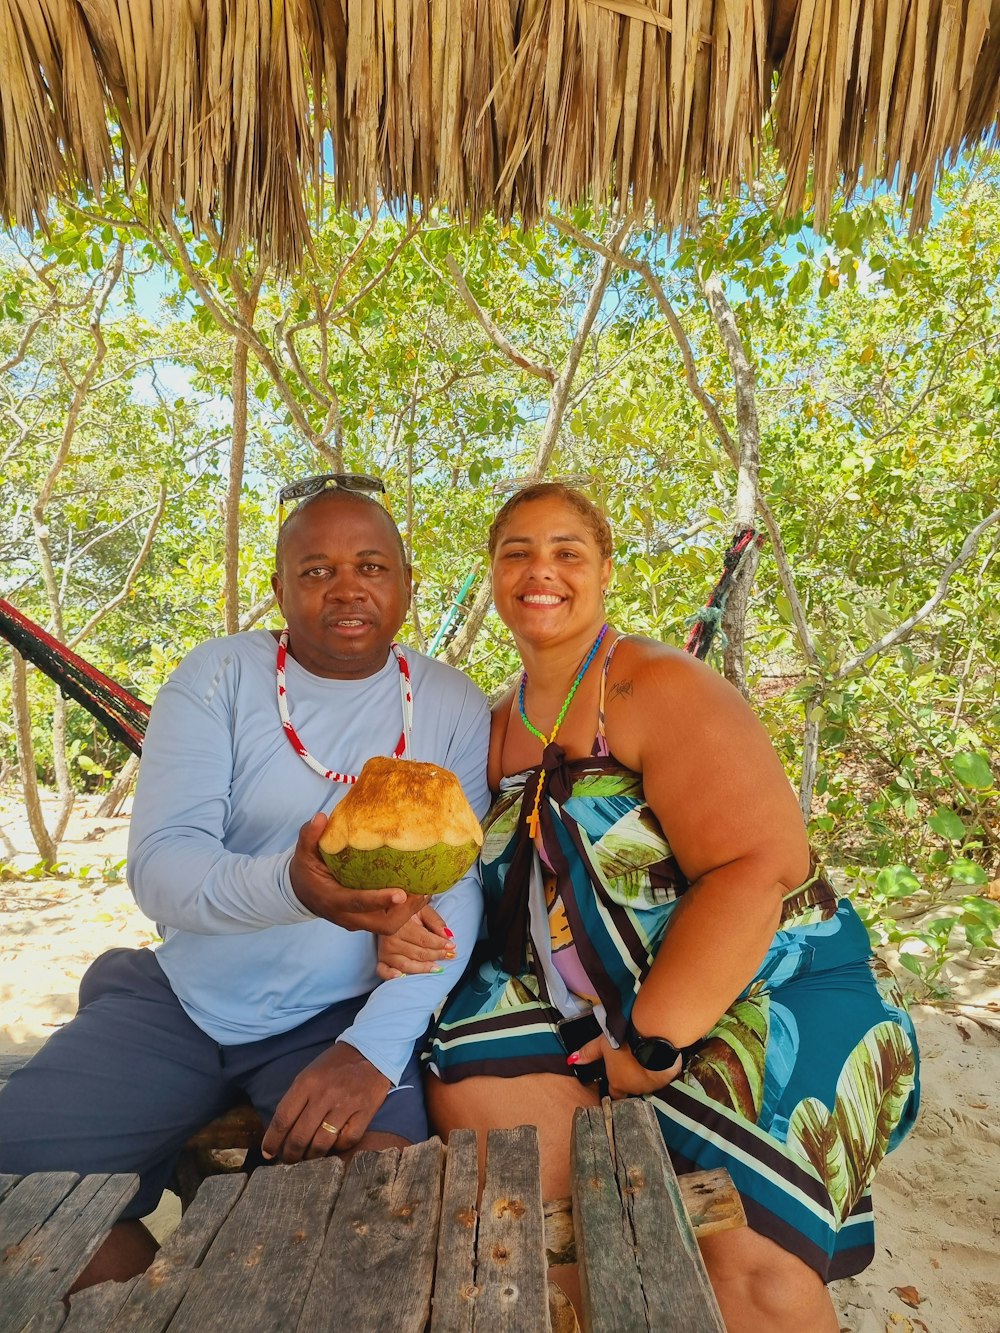 a man and a woman sitting on a bench holding a coconut